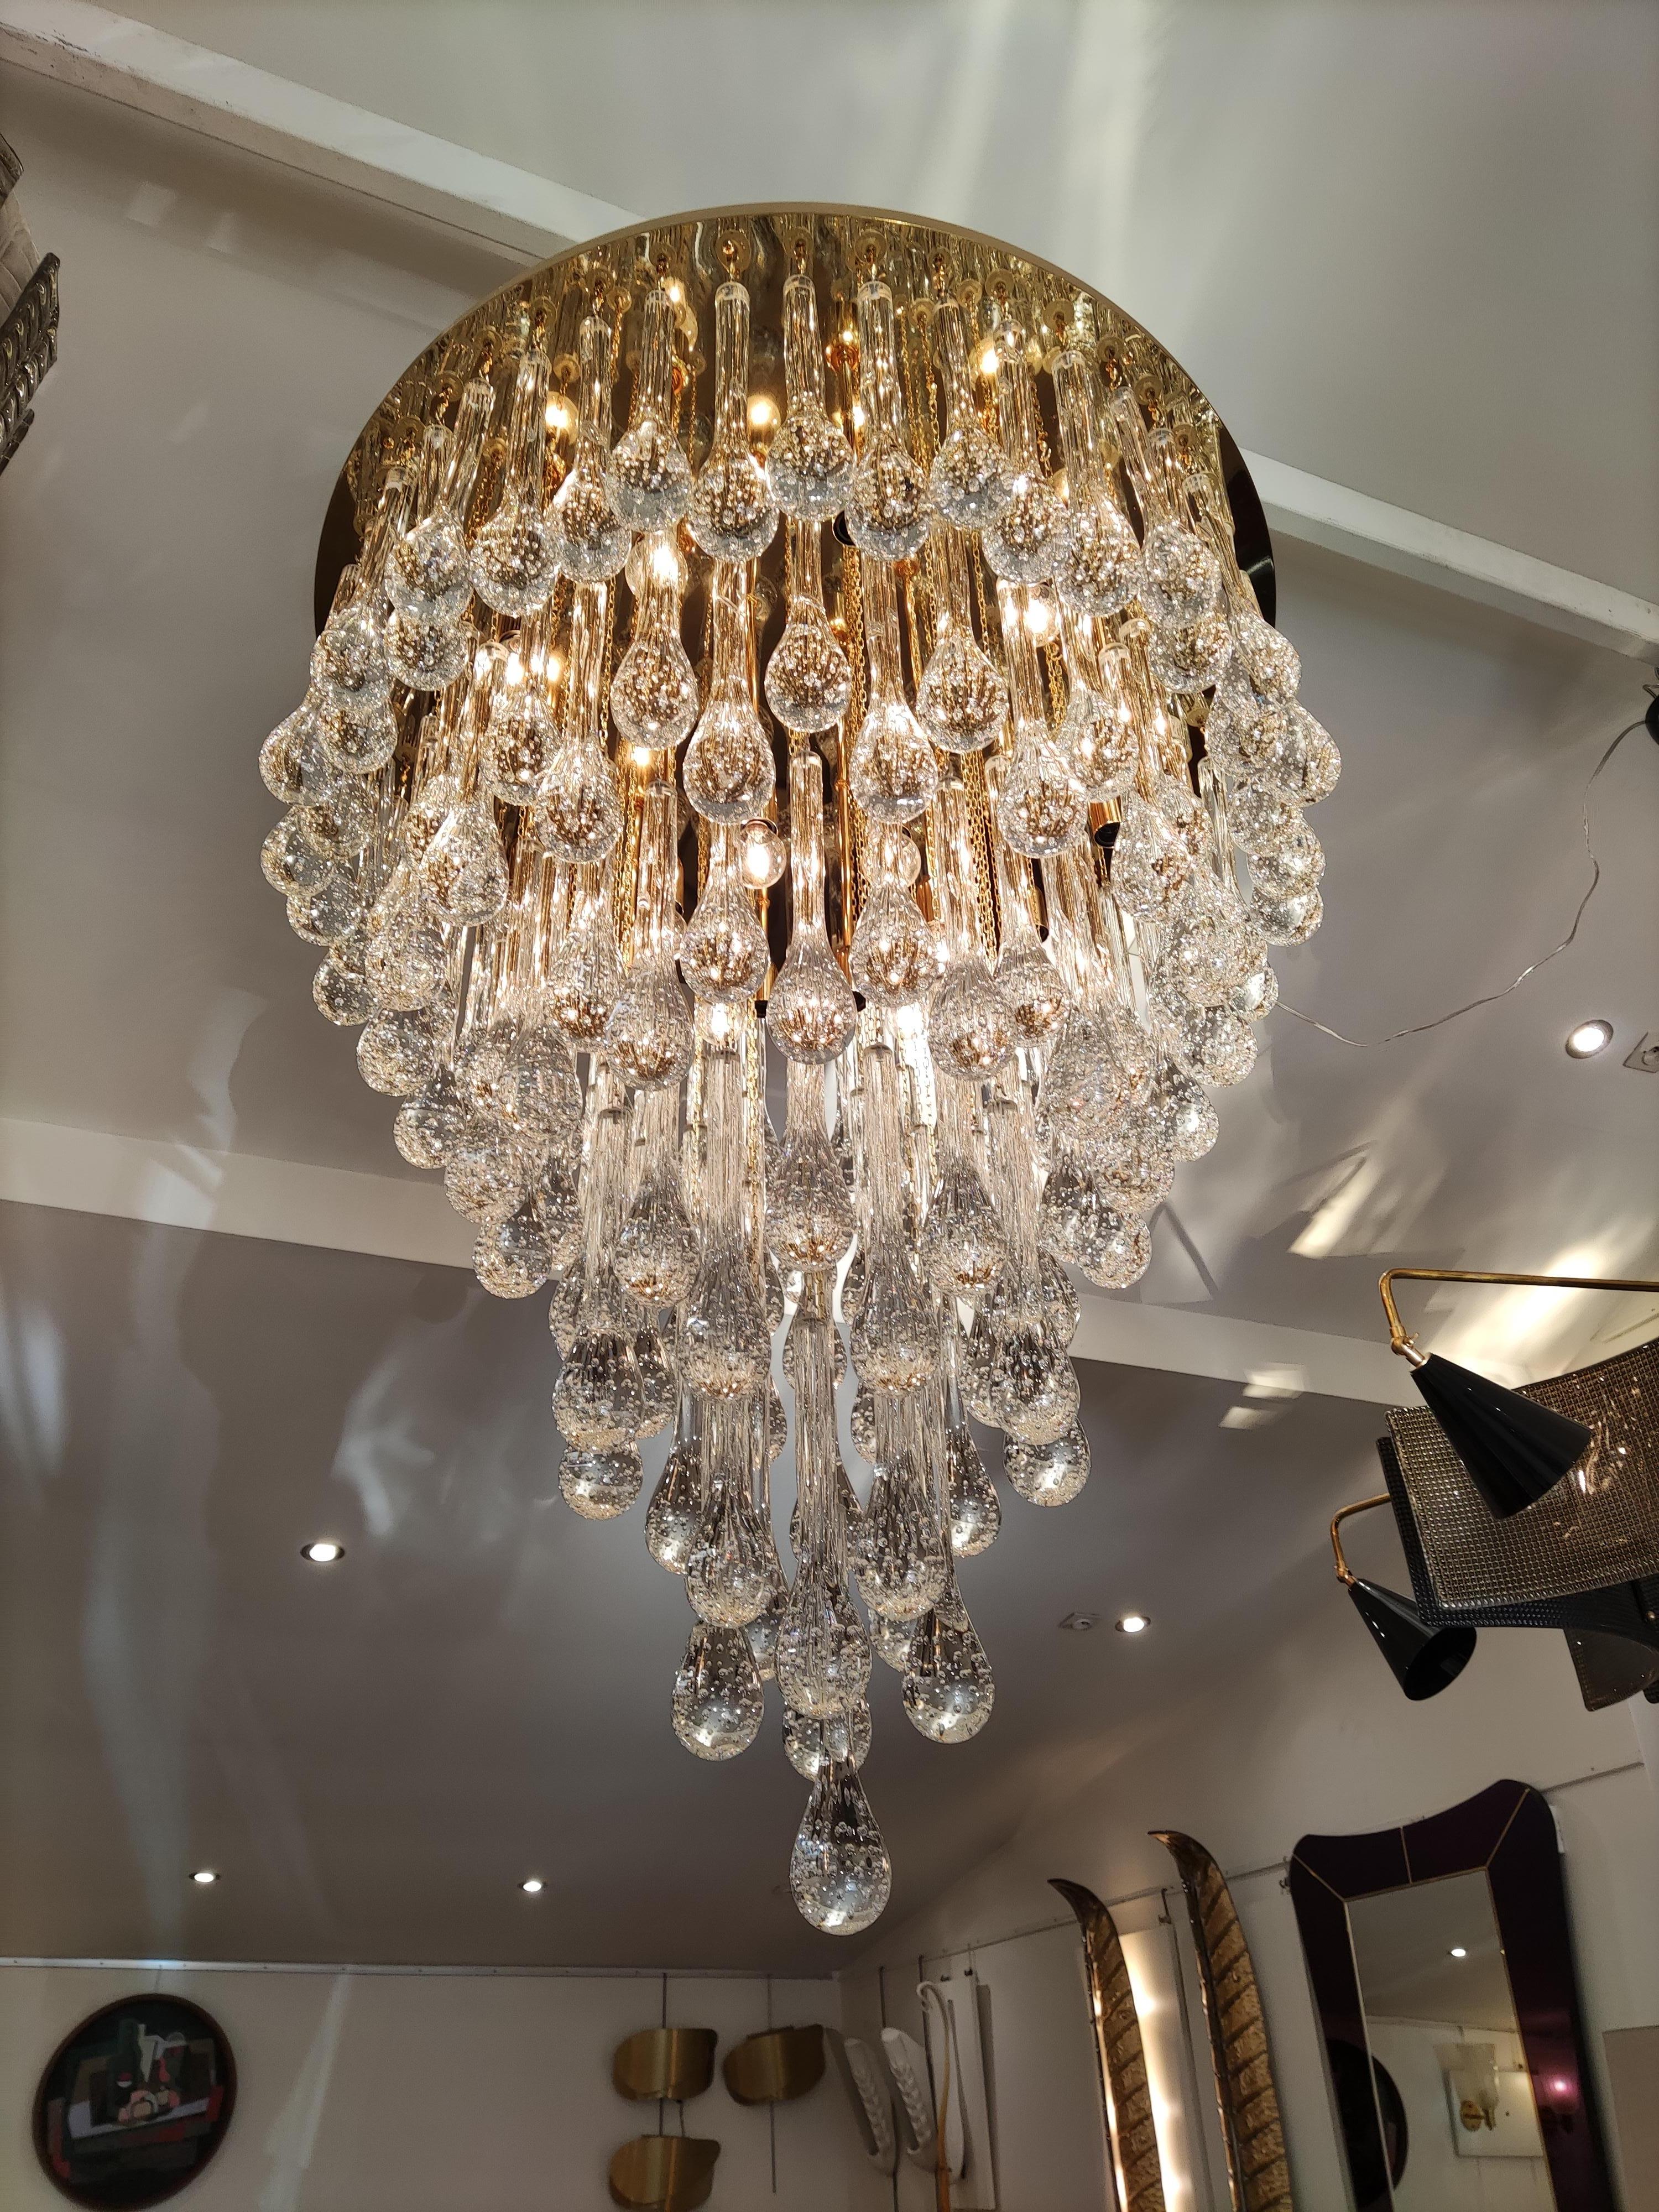 Huge Murano glass chandelier, with 141 crystal drops.